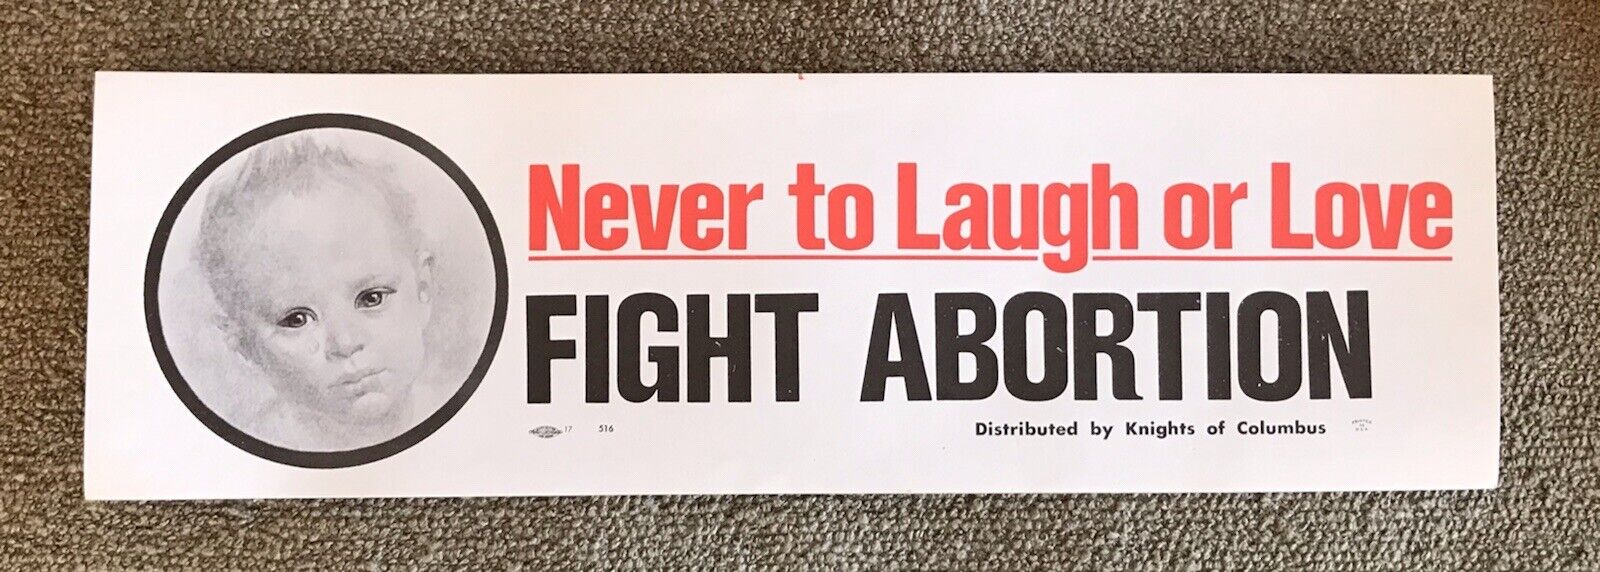 PRO-LIFE Bumper Sticker - NEVER TO LAUGH/LOVE FIGHT ABORTION Knights of Columbus